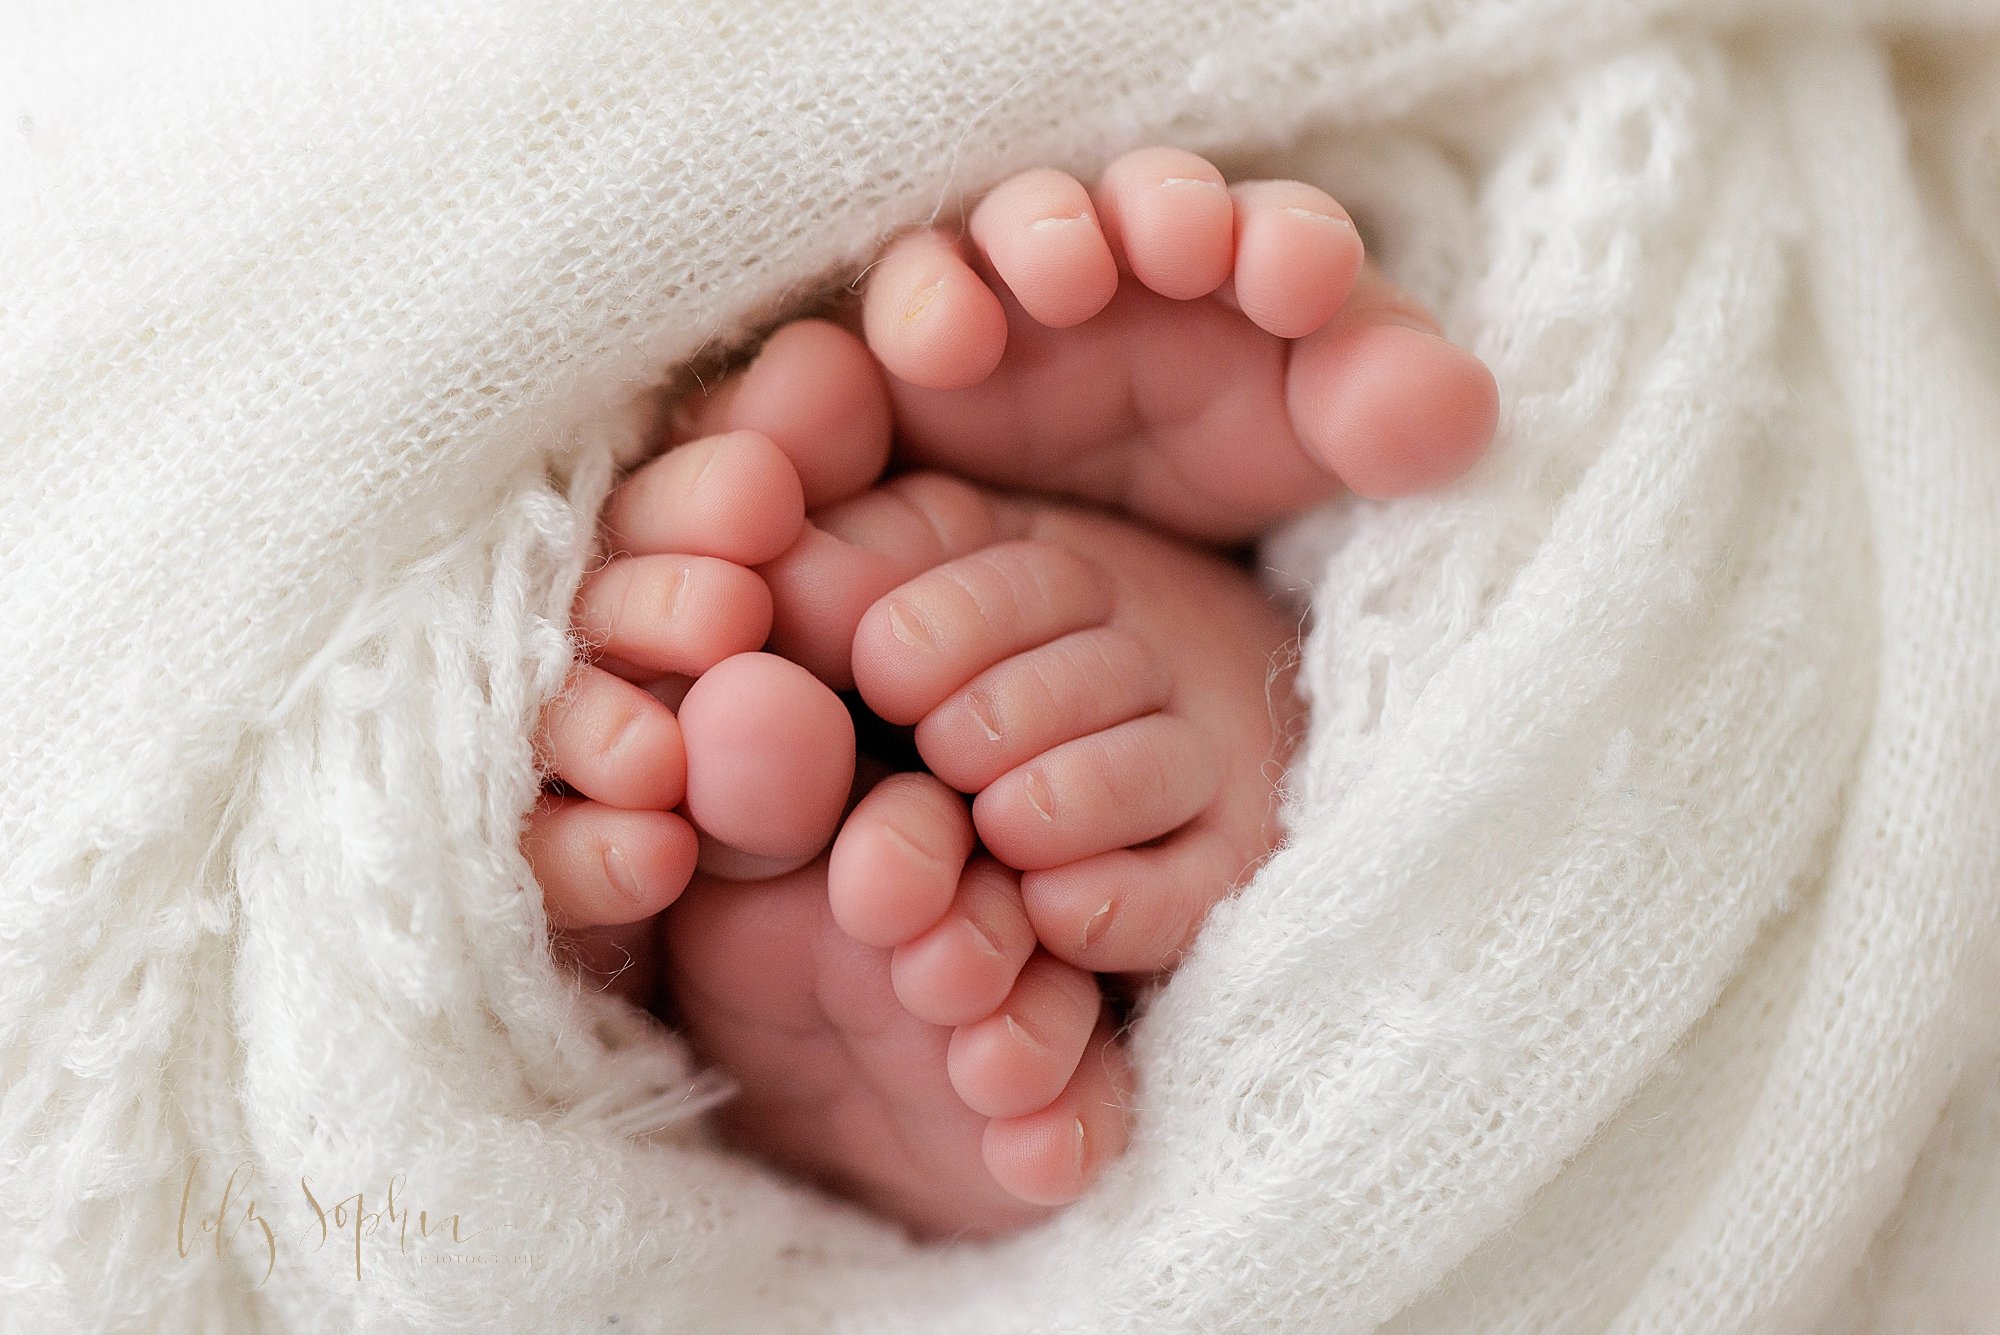  The four feet of newborn baby identical twins peek out from a soft white blanket taken near Kirkwood in Atlanta in a natural light photography studio. 